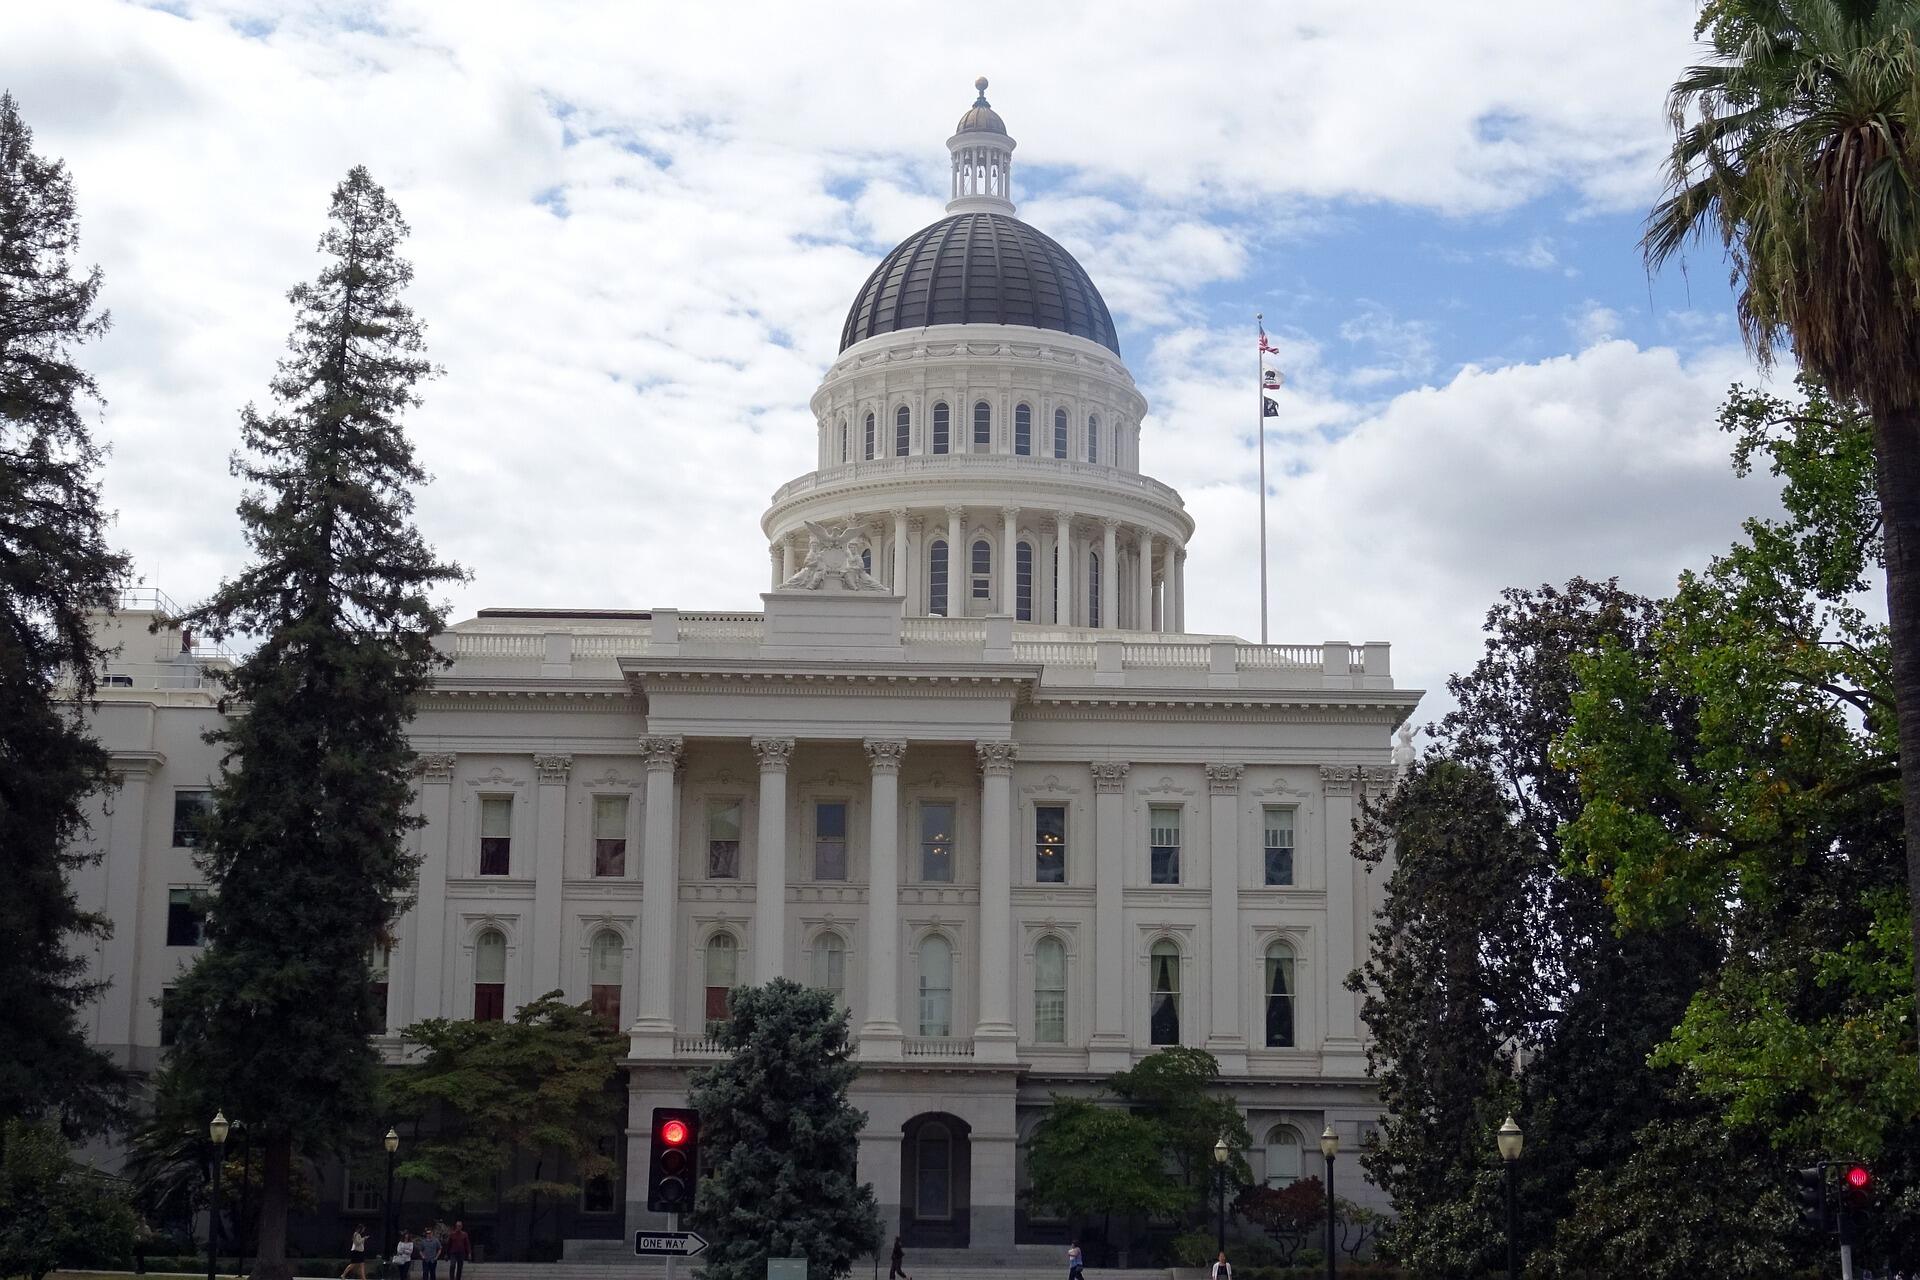 Photo of the front of the State Capitol in Sacramento, it's a white building with columns and a large dome in the middle of the roof with pine trees on either side of the building.